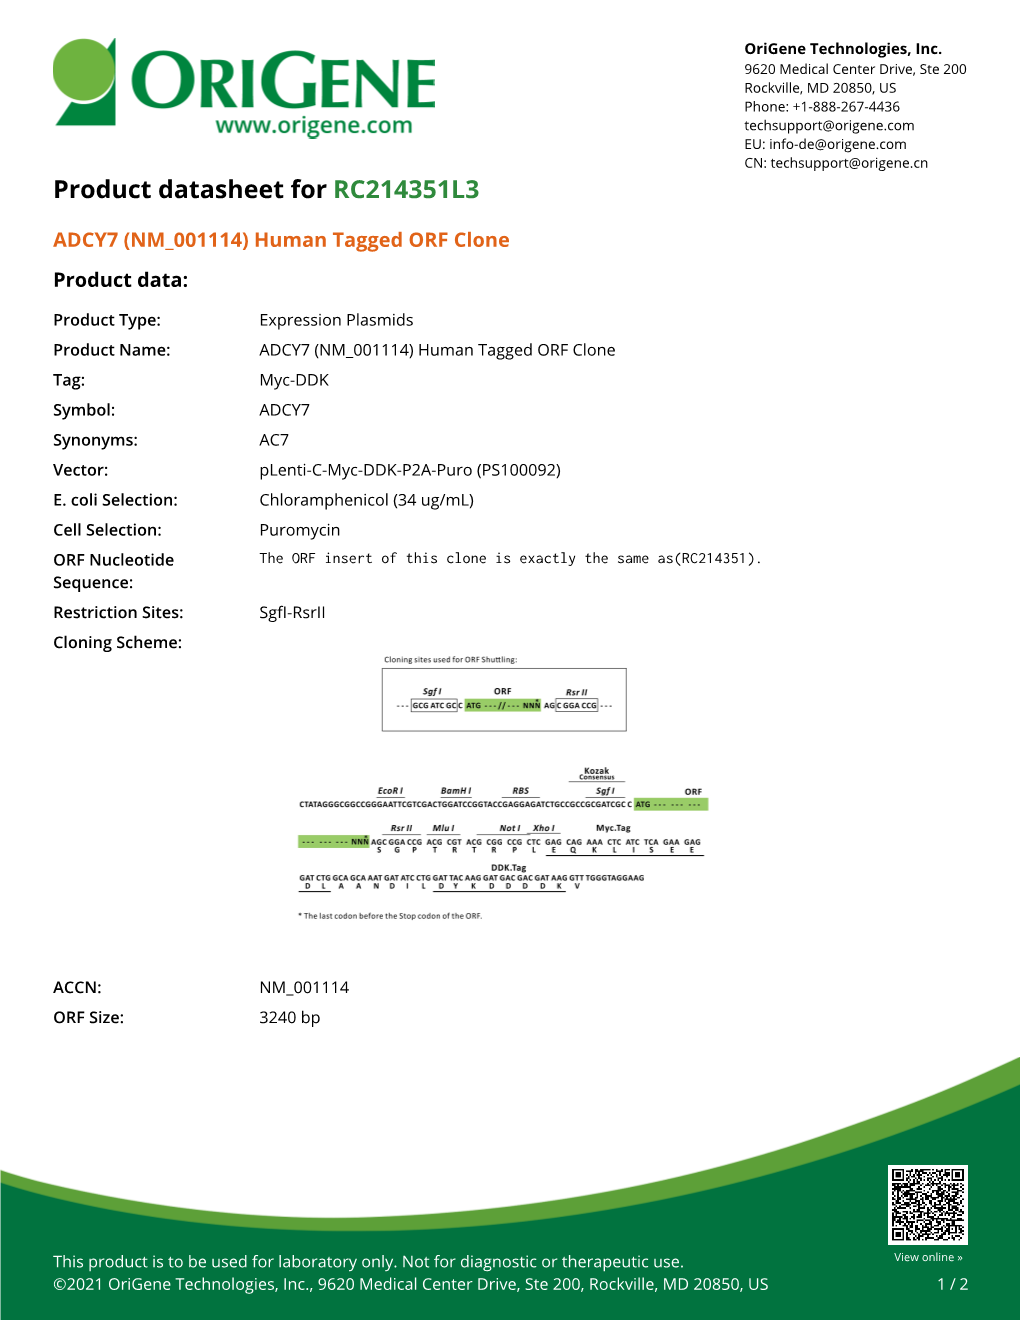 ADCY7 (NM 001114) Human Tagged ORF Clone Product Data